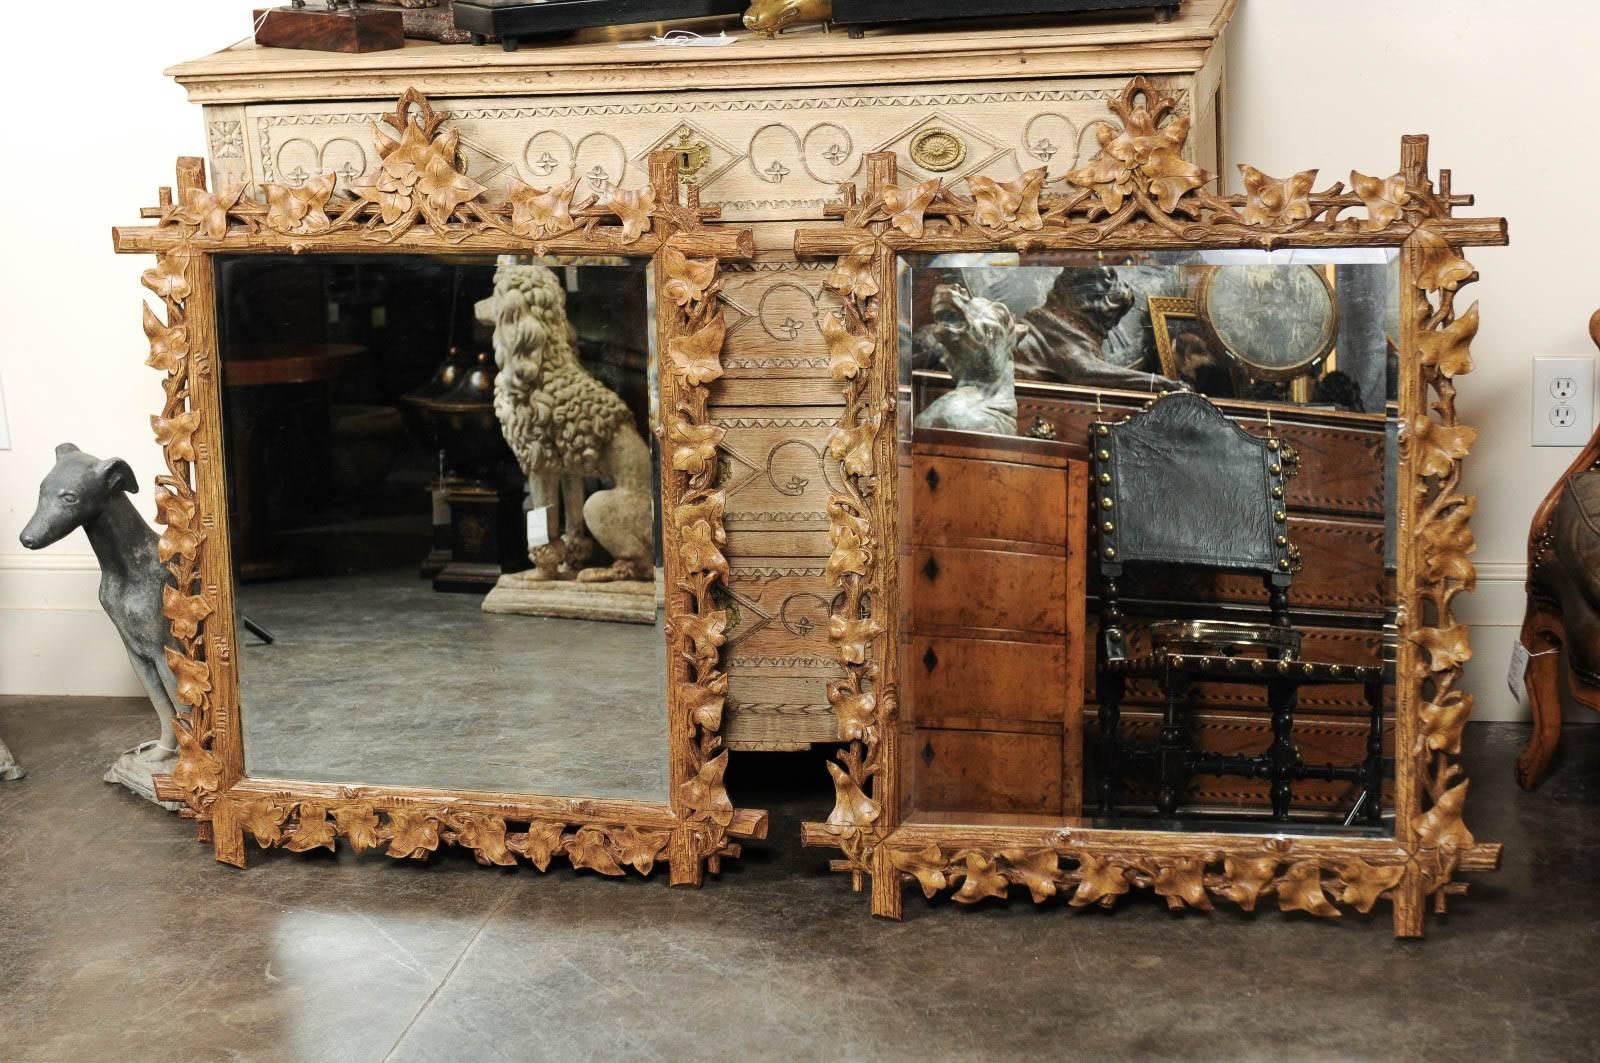  French Black Forest style mirror from the mid-20th century features a faux-bois frame made of a variety of leaves nicely intertwined along the rectangular frame made of four faux branches put together. The clear mirror which provides great